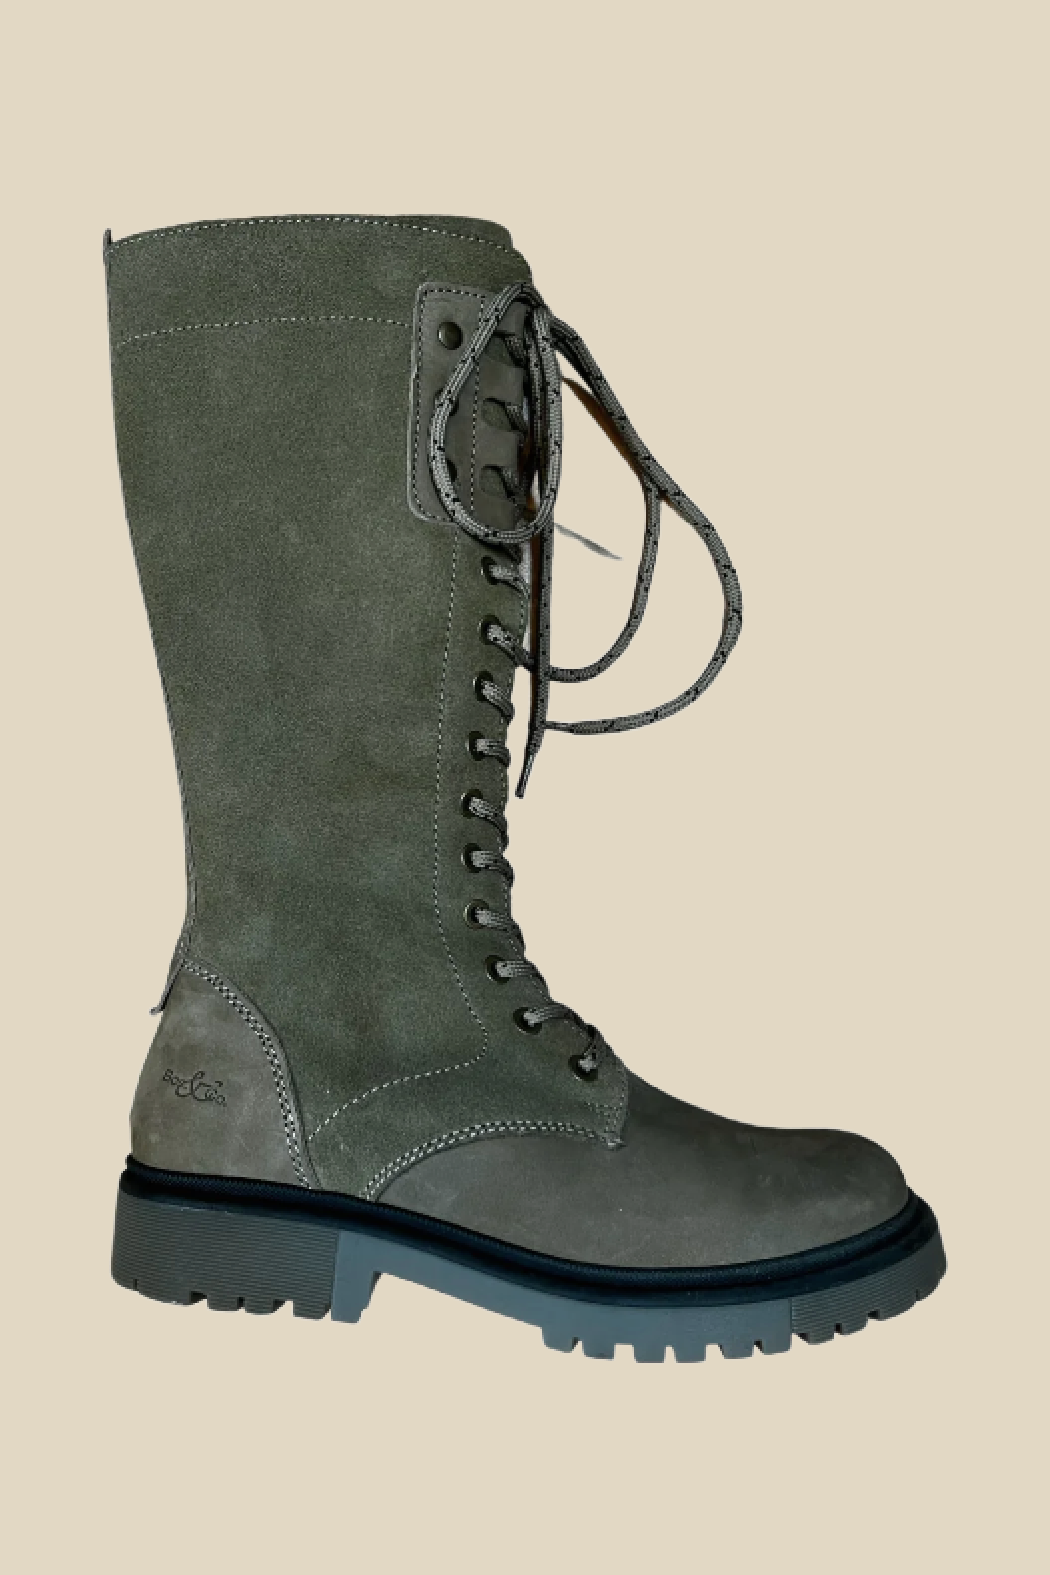 Axe Lace Up Tall Boot